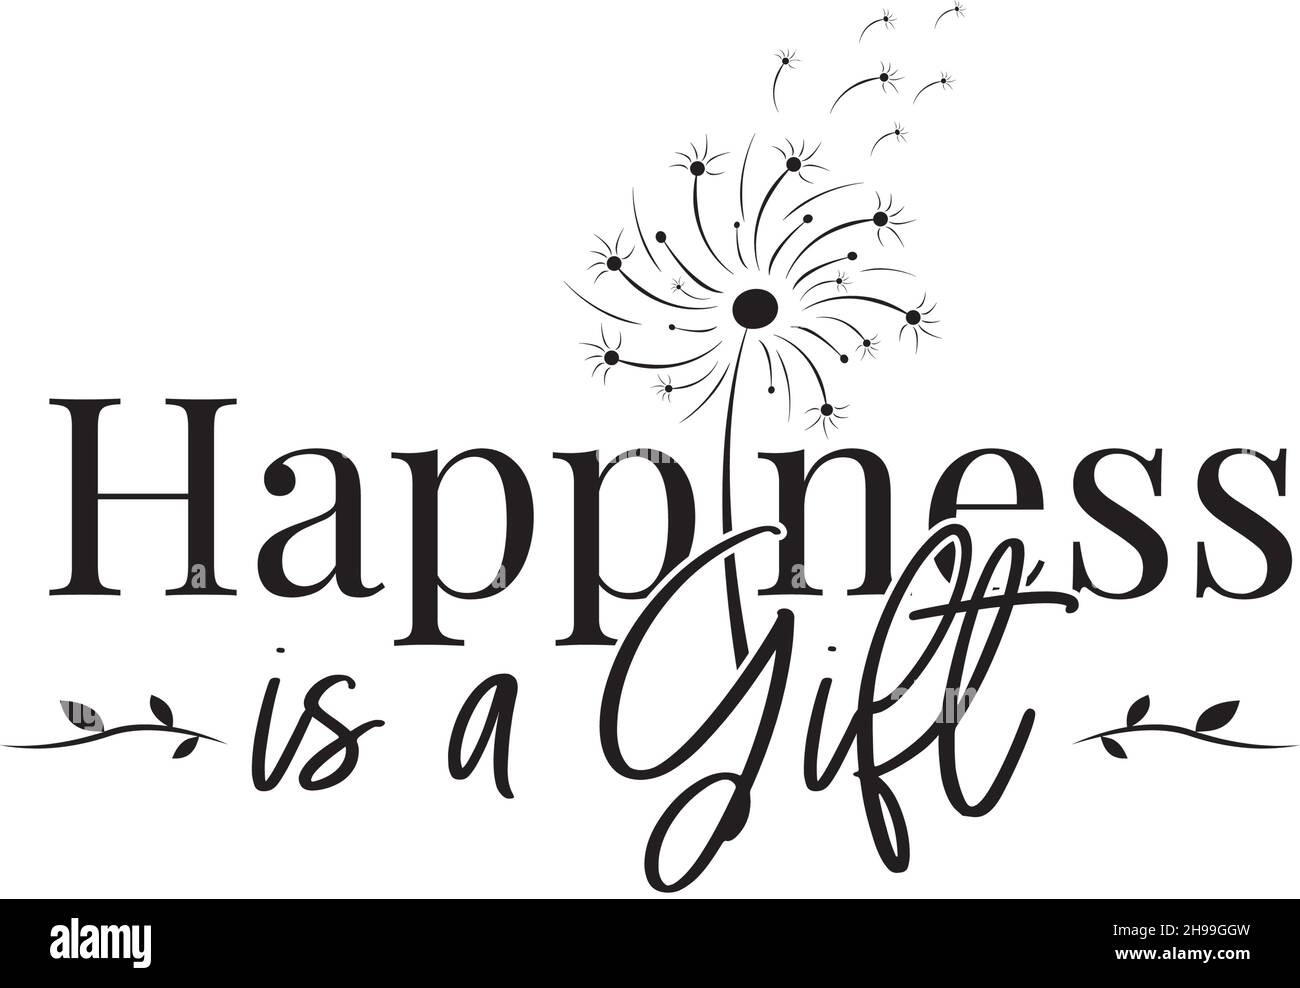 Happiness is a gift, vector. Motivational inspirational positive quotes. Wording design isolated on white background, lettering. Wall art, artwork Stock Vector